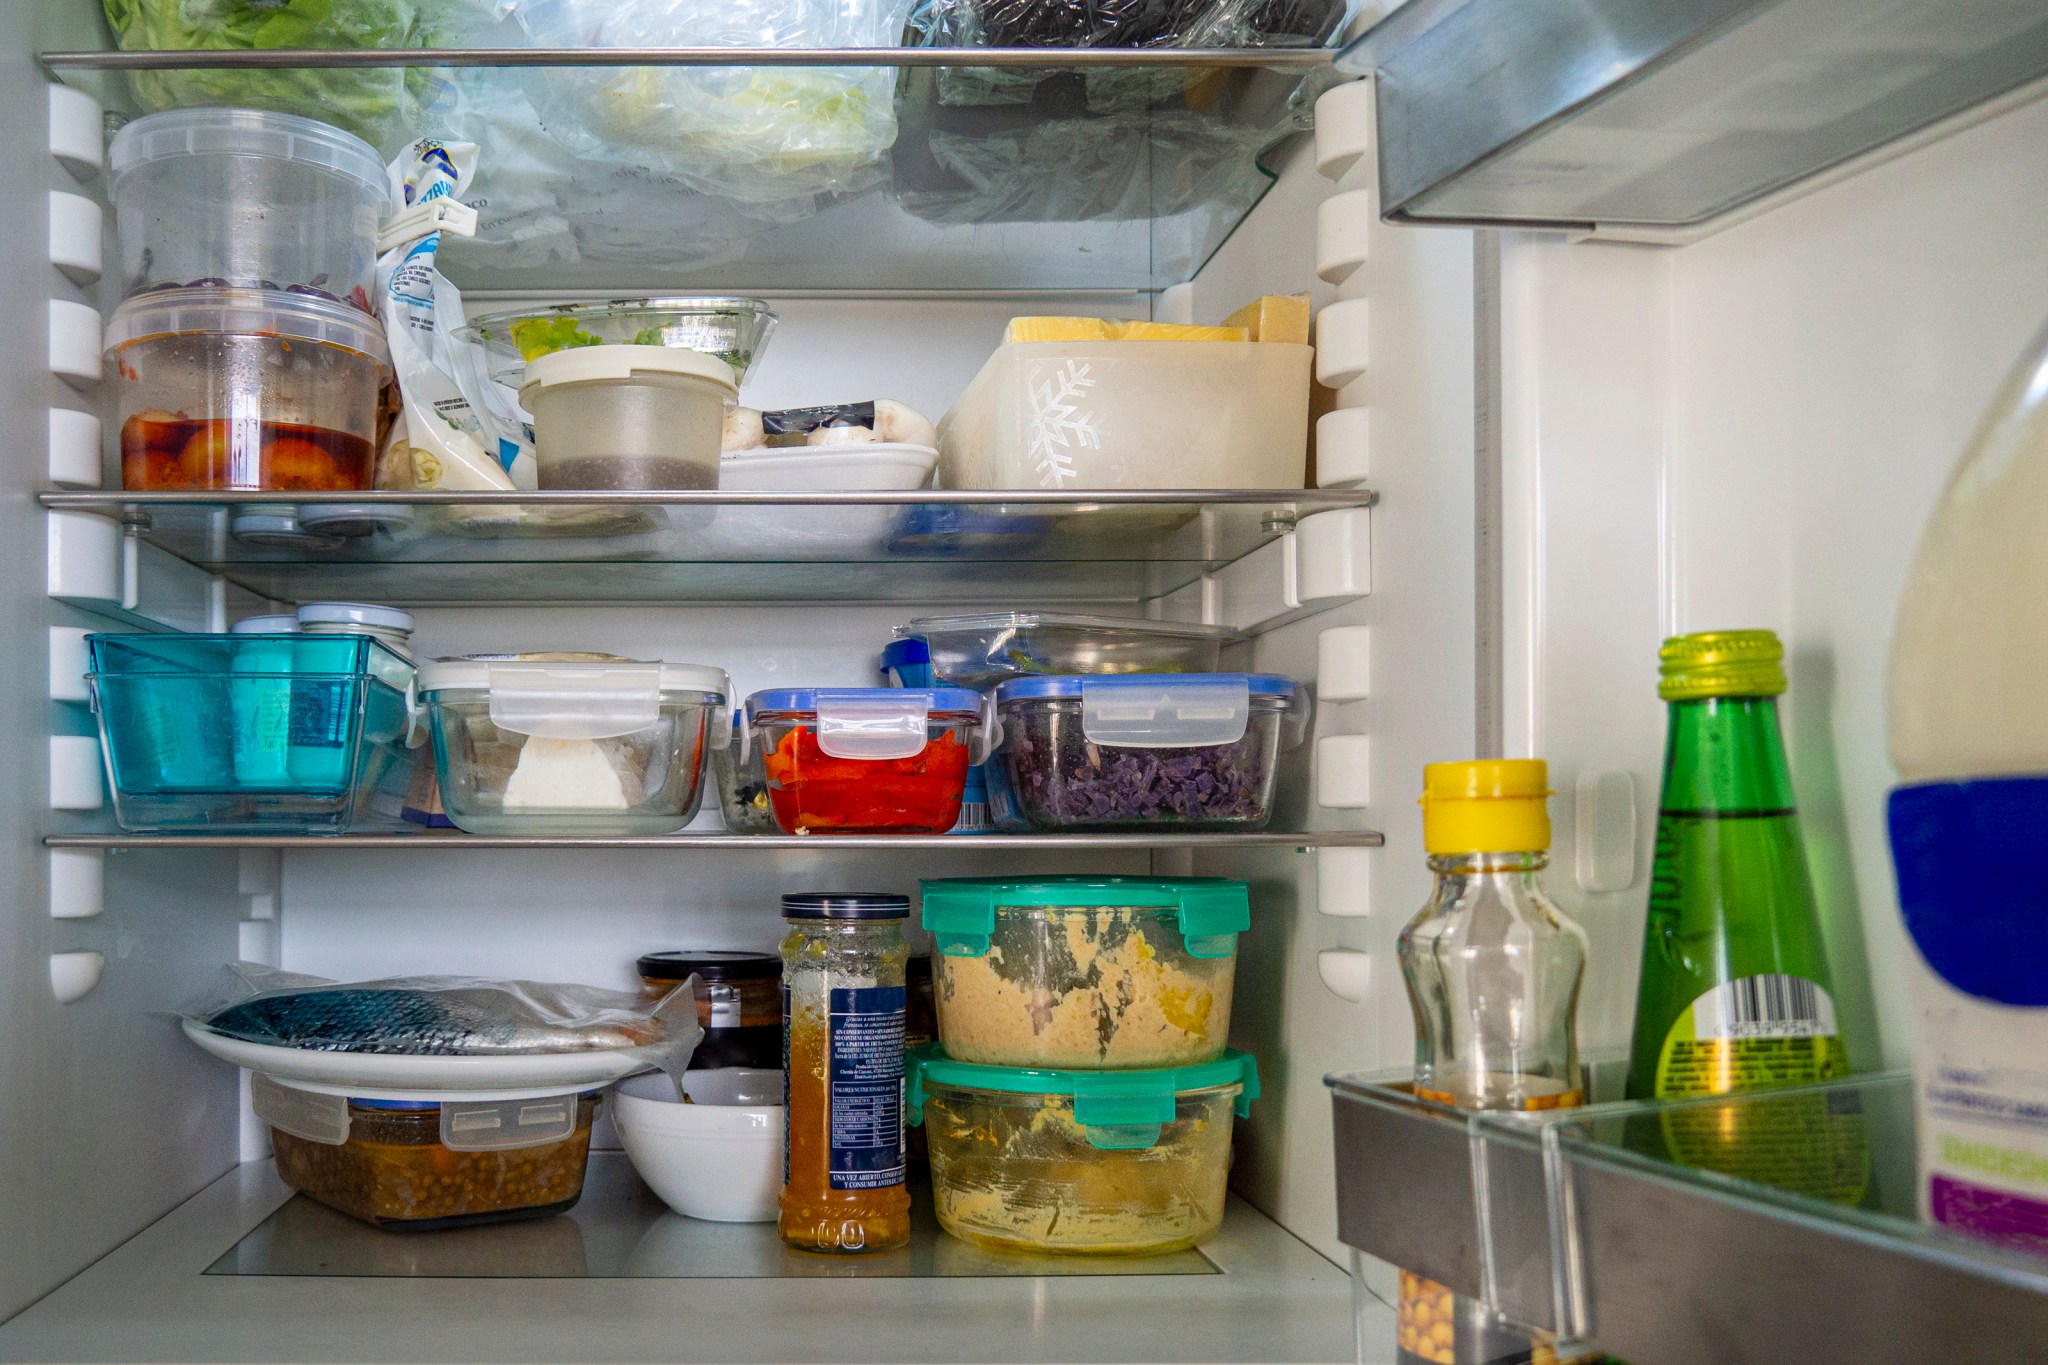 Tip: Put a Separate Bin in Your Refrigerator for Meat